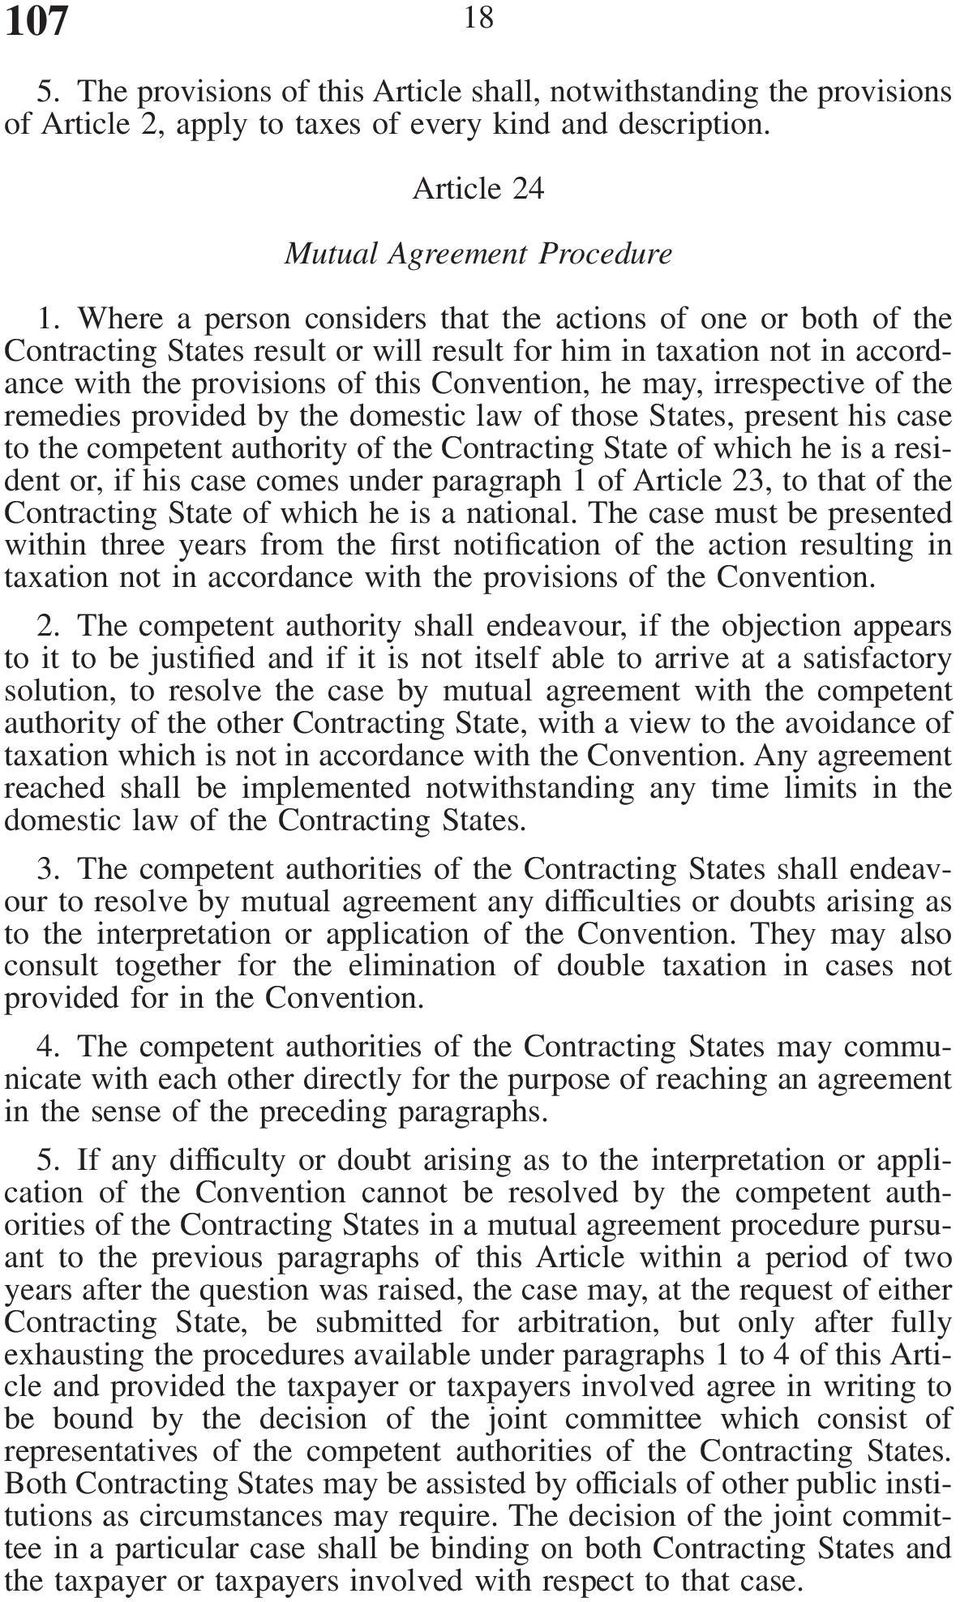 irrespective of the remedies provided by the domestic law of those States, present his case to the competent authority of the Contracting State of which he is a resident or, if his case comes under